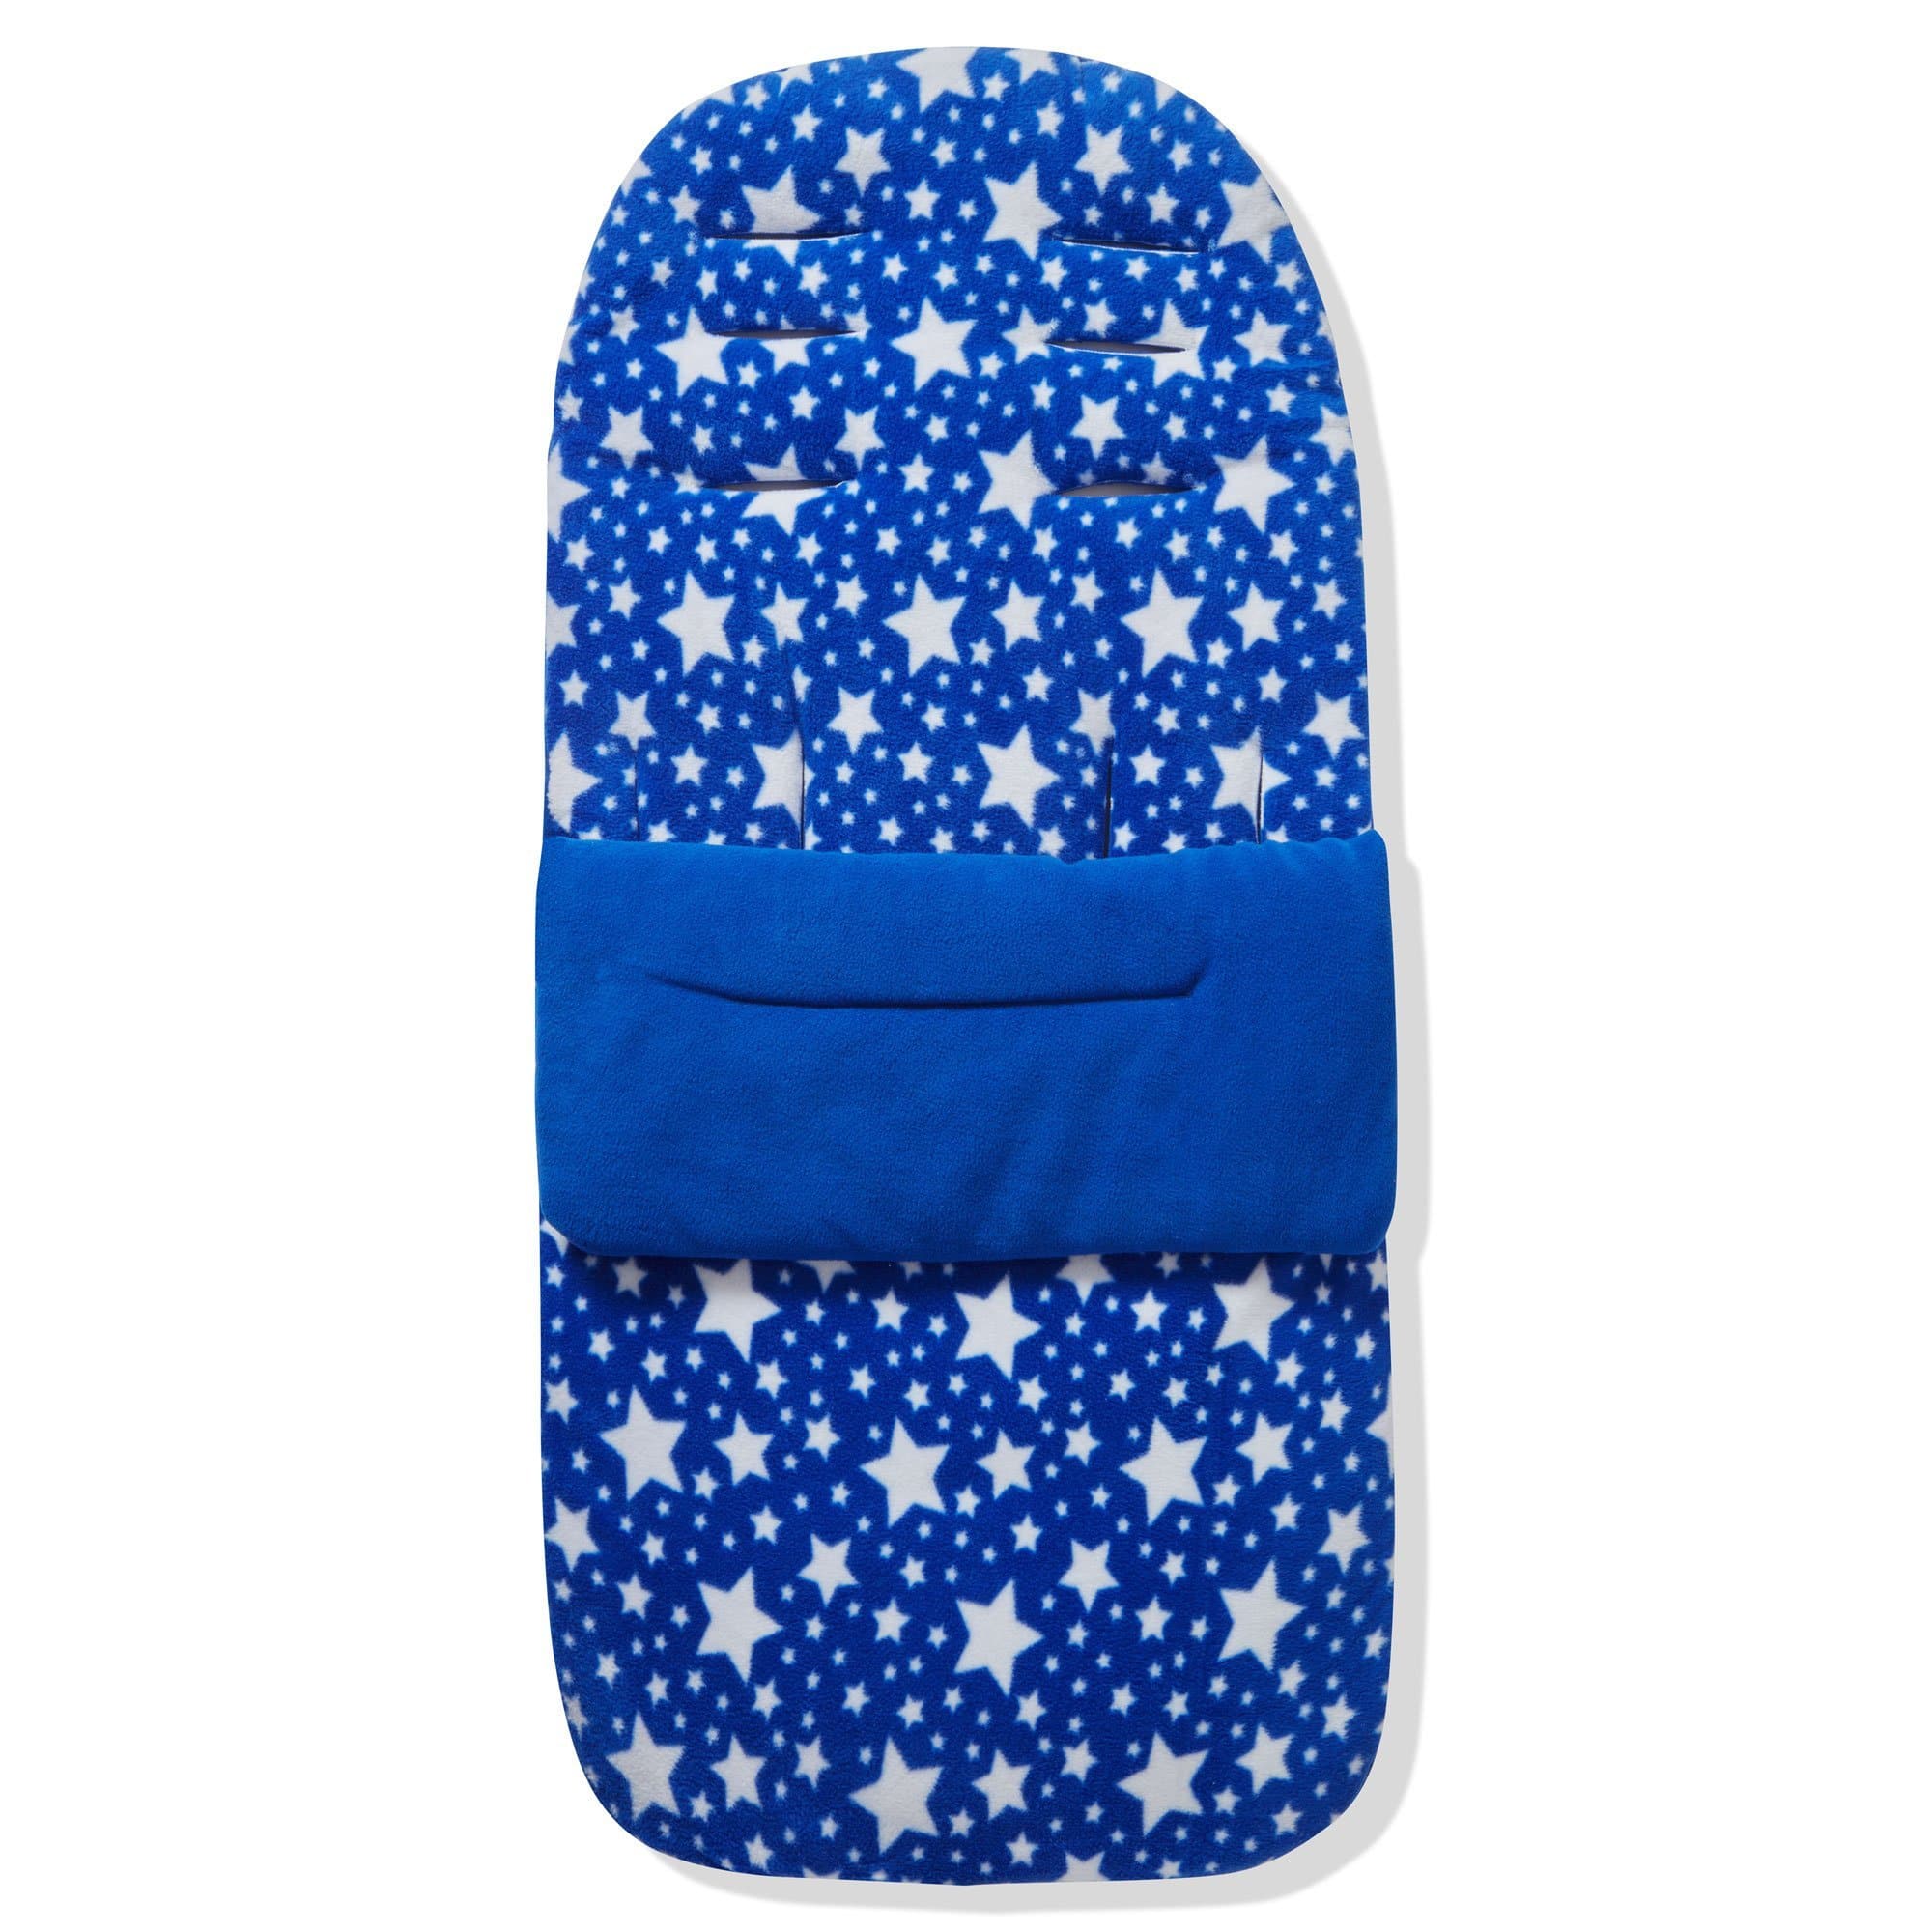 Fleece Footmuff / Cosy Toes Compatible with Obaby - Blue Star / Fits All Models | For Your Little One